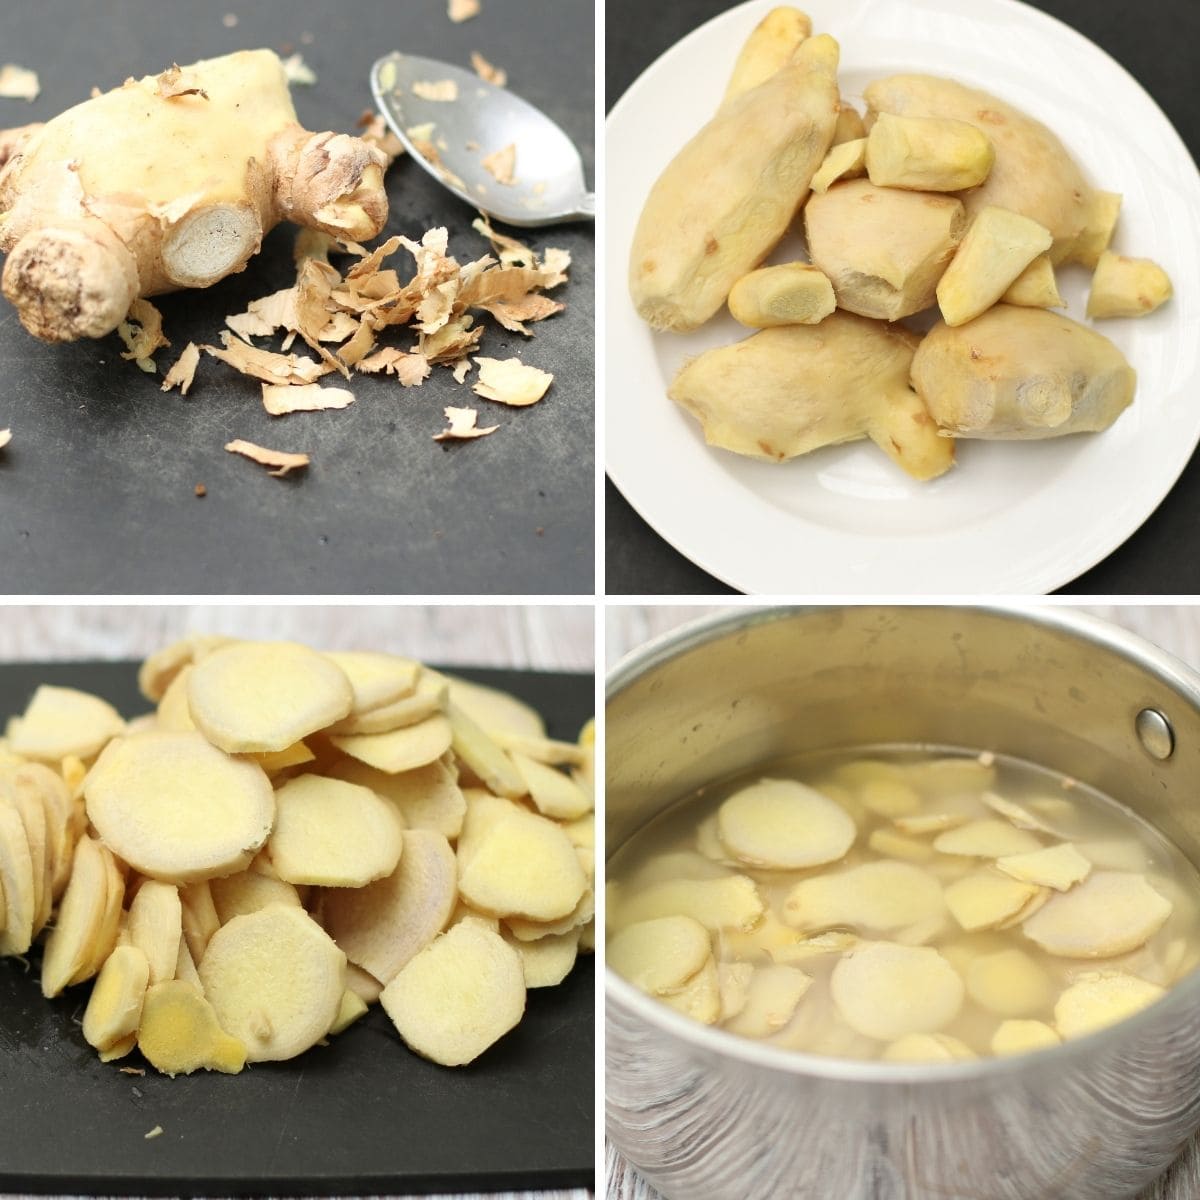 4-way process shots showing how to peel, slice, and cook fresh ginger.